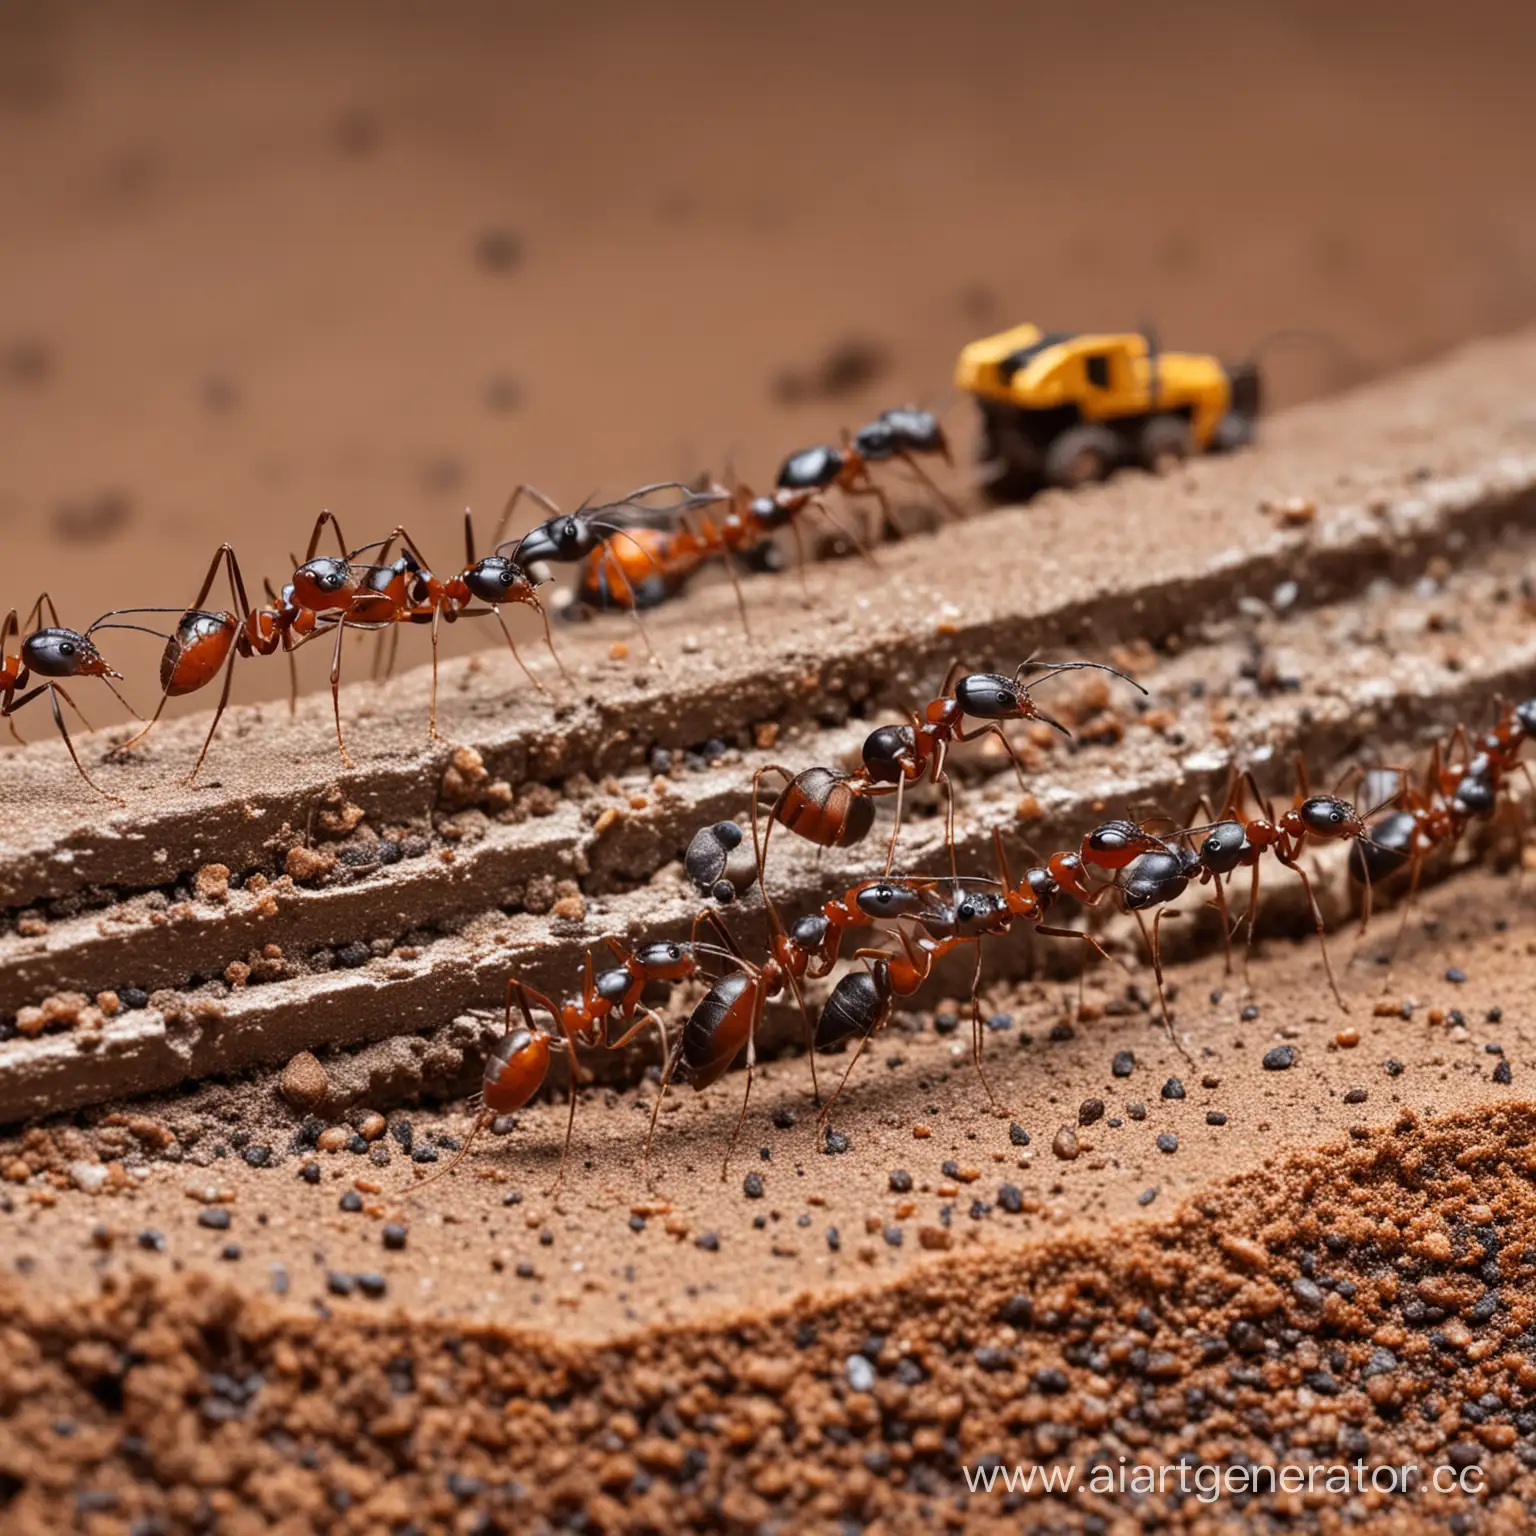 Industrious-Ants-Managing-Cargo-in-a-Factory-Setting